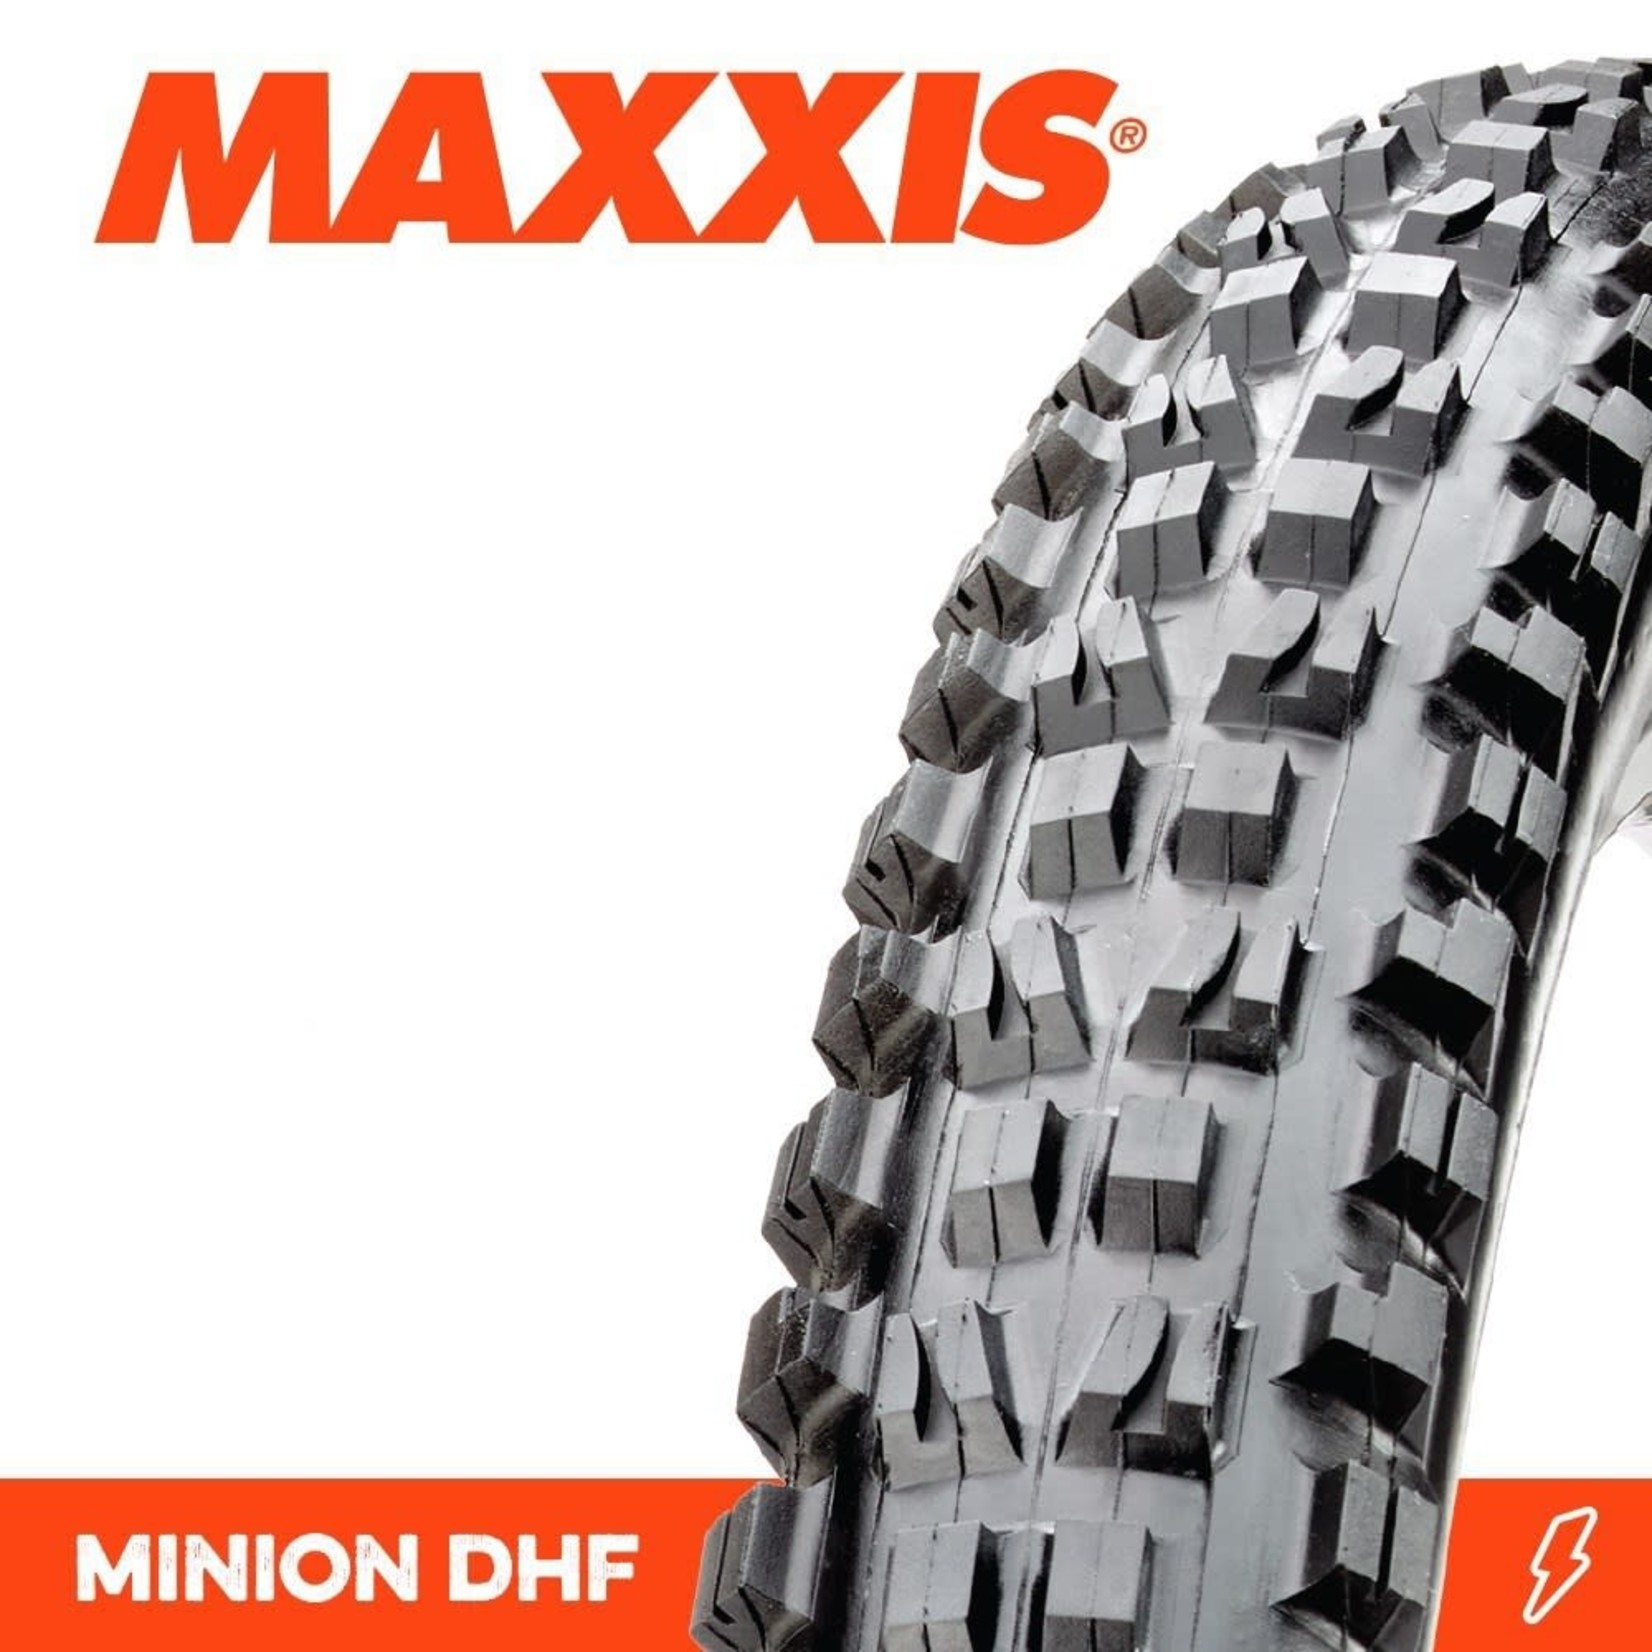 Maxxis Maxxis Minion DHF Bike Tyre - 20 X 2.40 - Wire Bead Tyre - 60TPI - Pair